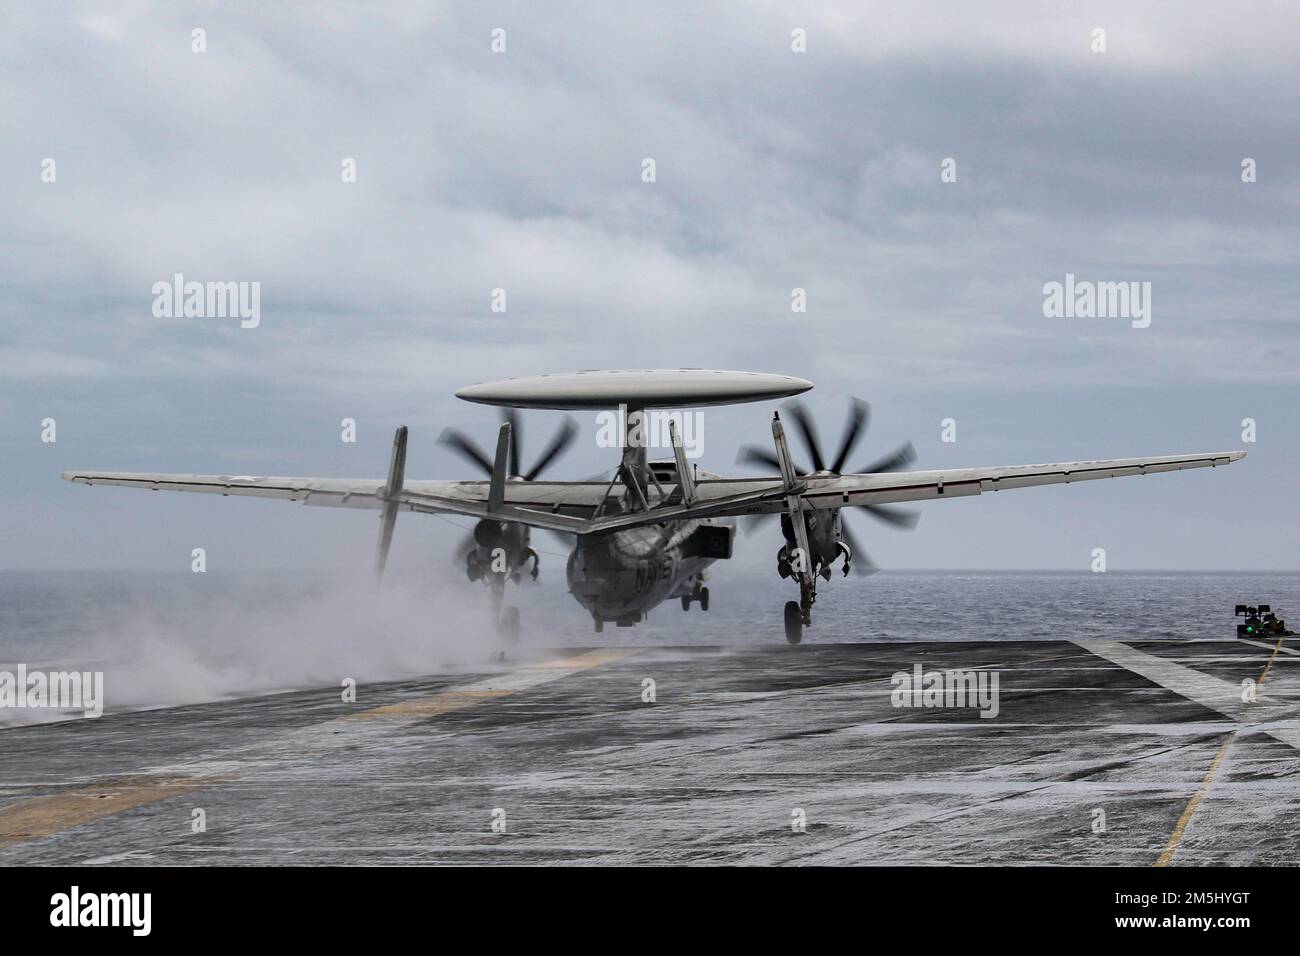 PHILIPPINE SEA (March 18, 2022) An E-2D Hawkeye, assigned to the 'Wallbangers' of Carrier Airborne Early Warning Squadron (VAW) 117, launches from the flight deck of the Nimitz-class aircraft carrier USS Abraham Lincoln (CVN 72). Abraham Lincoln Strike Group is on a scheduled deployment in the U.S. 7th Fleet area of operations to enhance interoperability through alliances and partnerships while serving as a ready-response force in support of a free and open Indo-Pacific region. Stock Photo